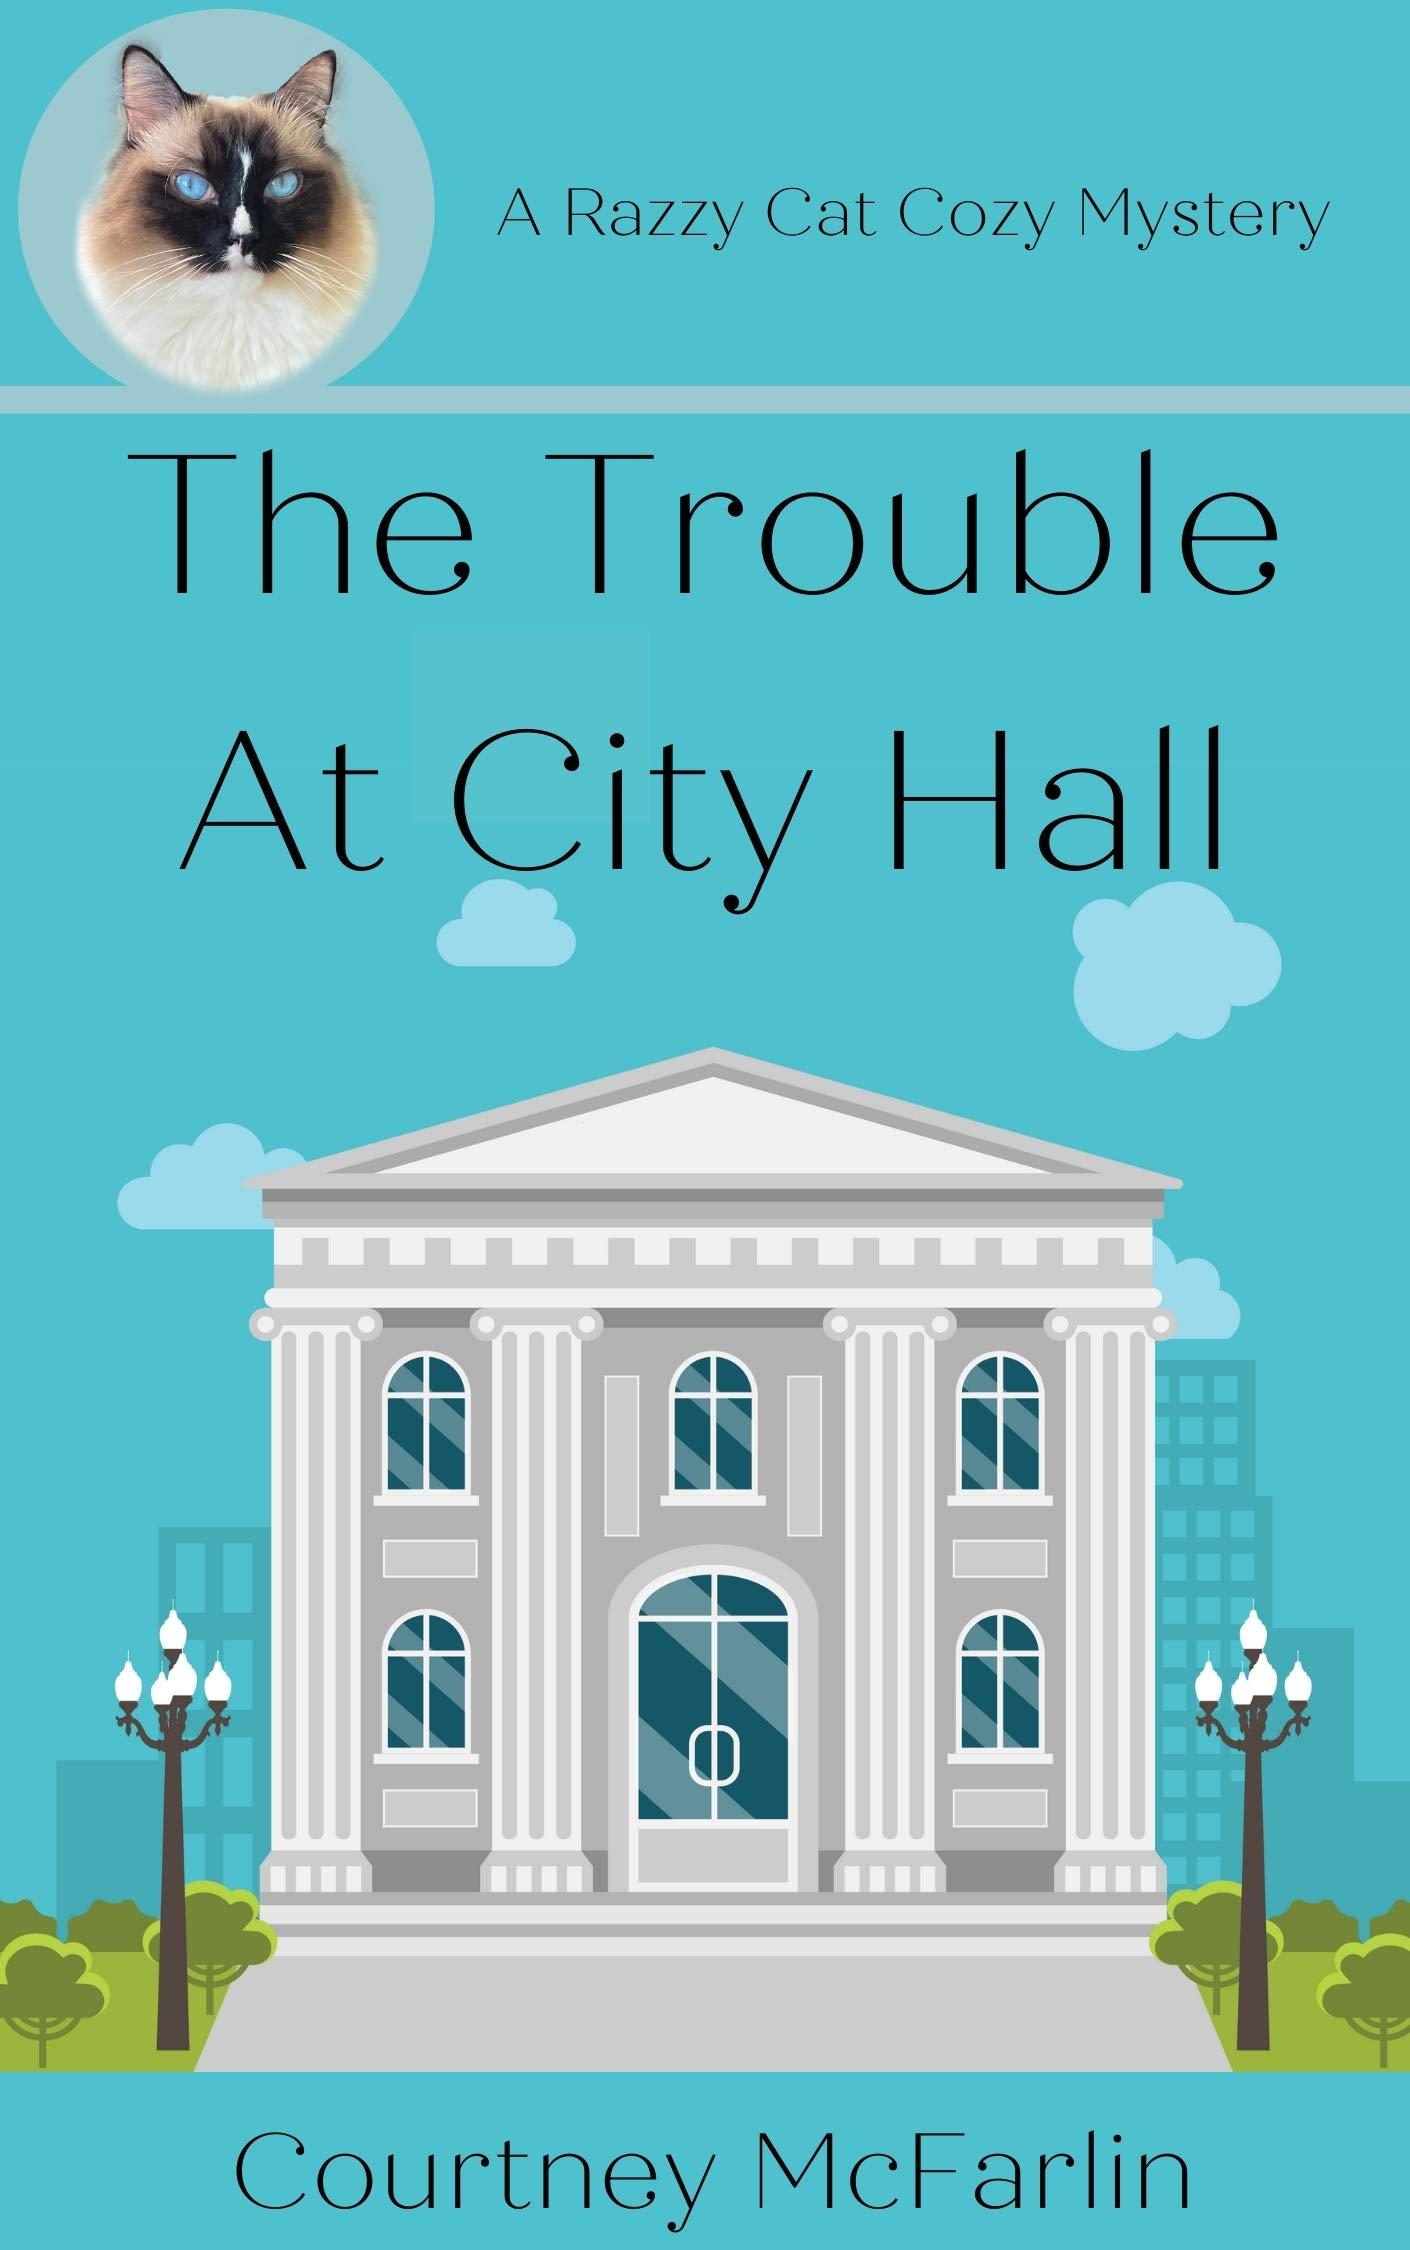 The Trouble At City Hall